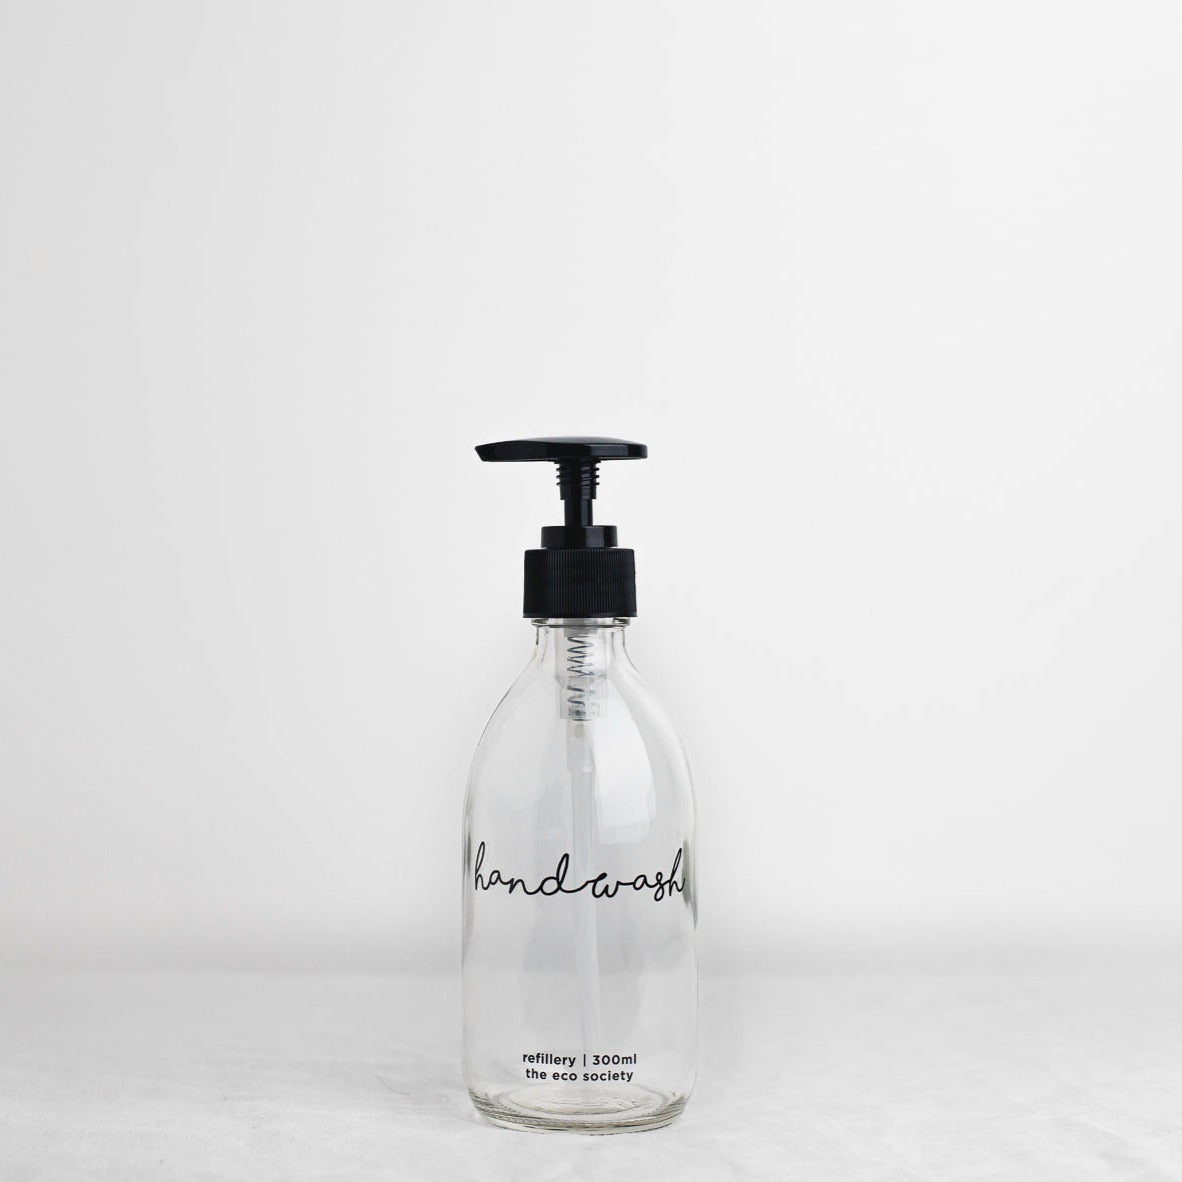 Clear Glass Bottle with Black printed text "Handwash" 300ml Refillery Bottle 